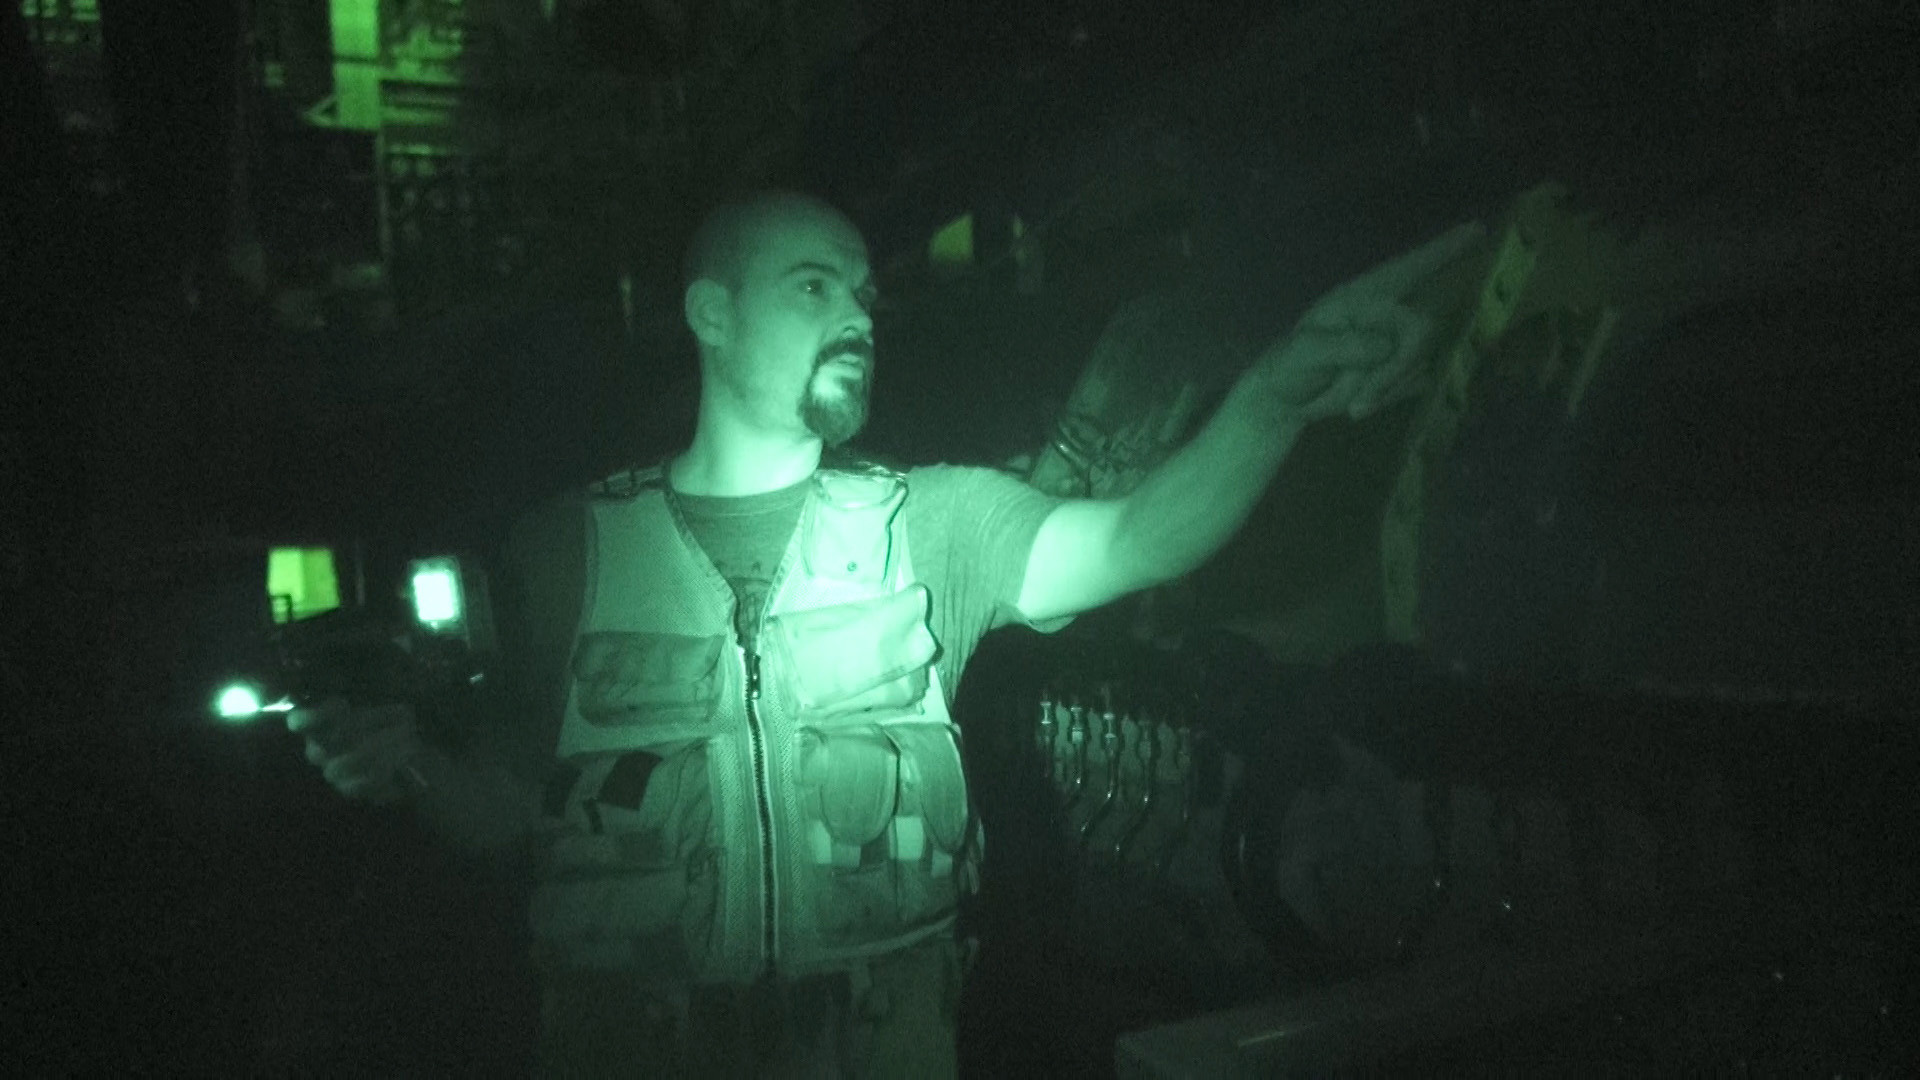 1920x1080 ... Ghost Adventures: Aaron Goodwin investigates the Queen Mary engine room  during lockdown ...